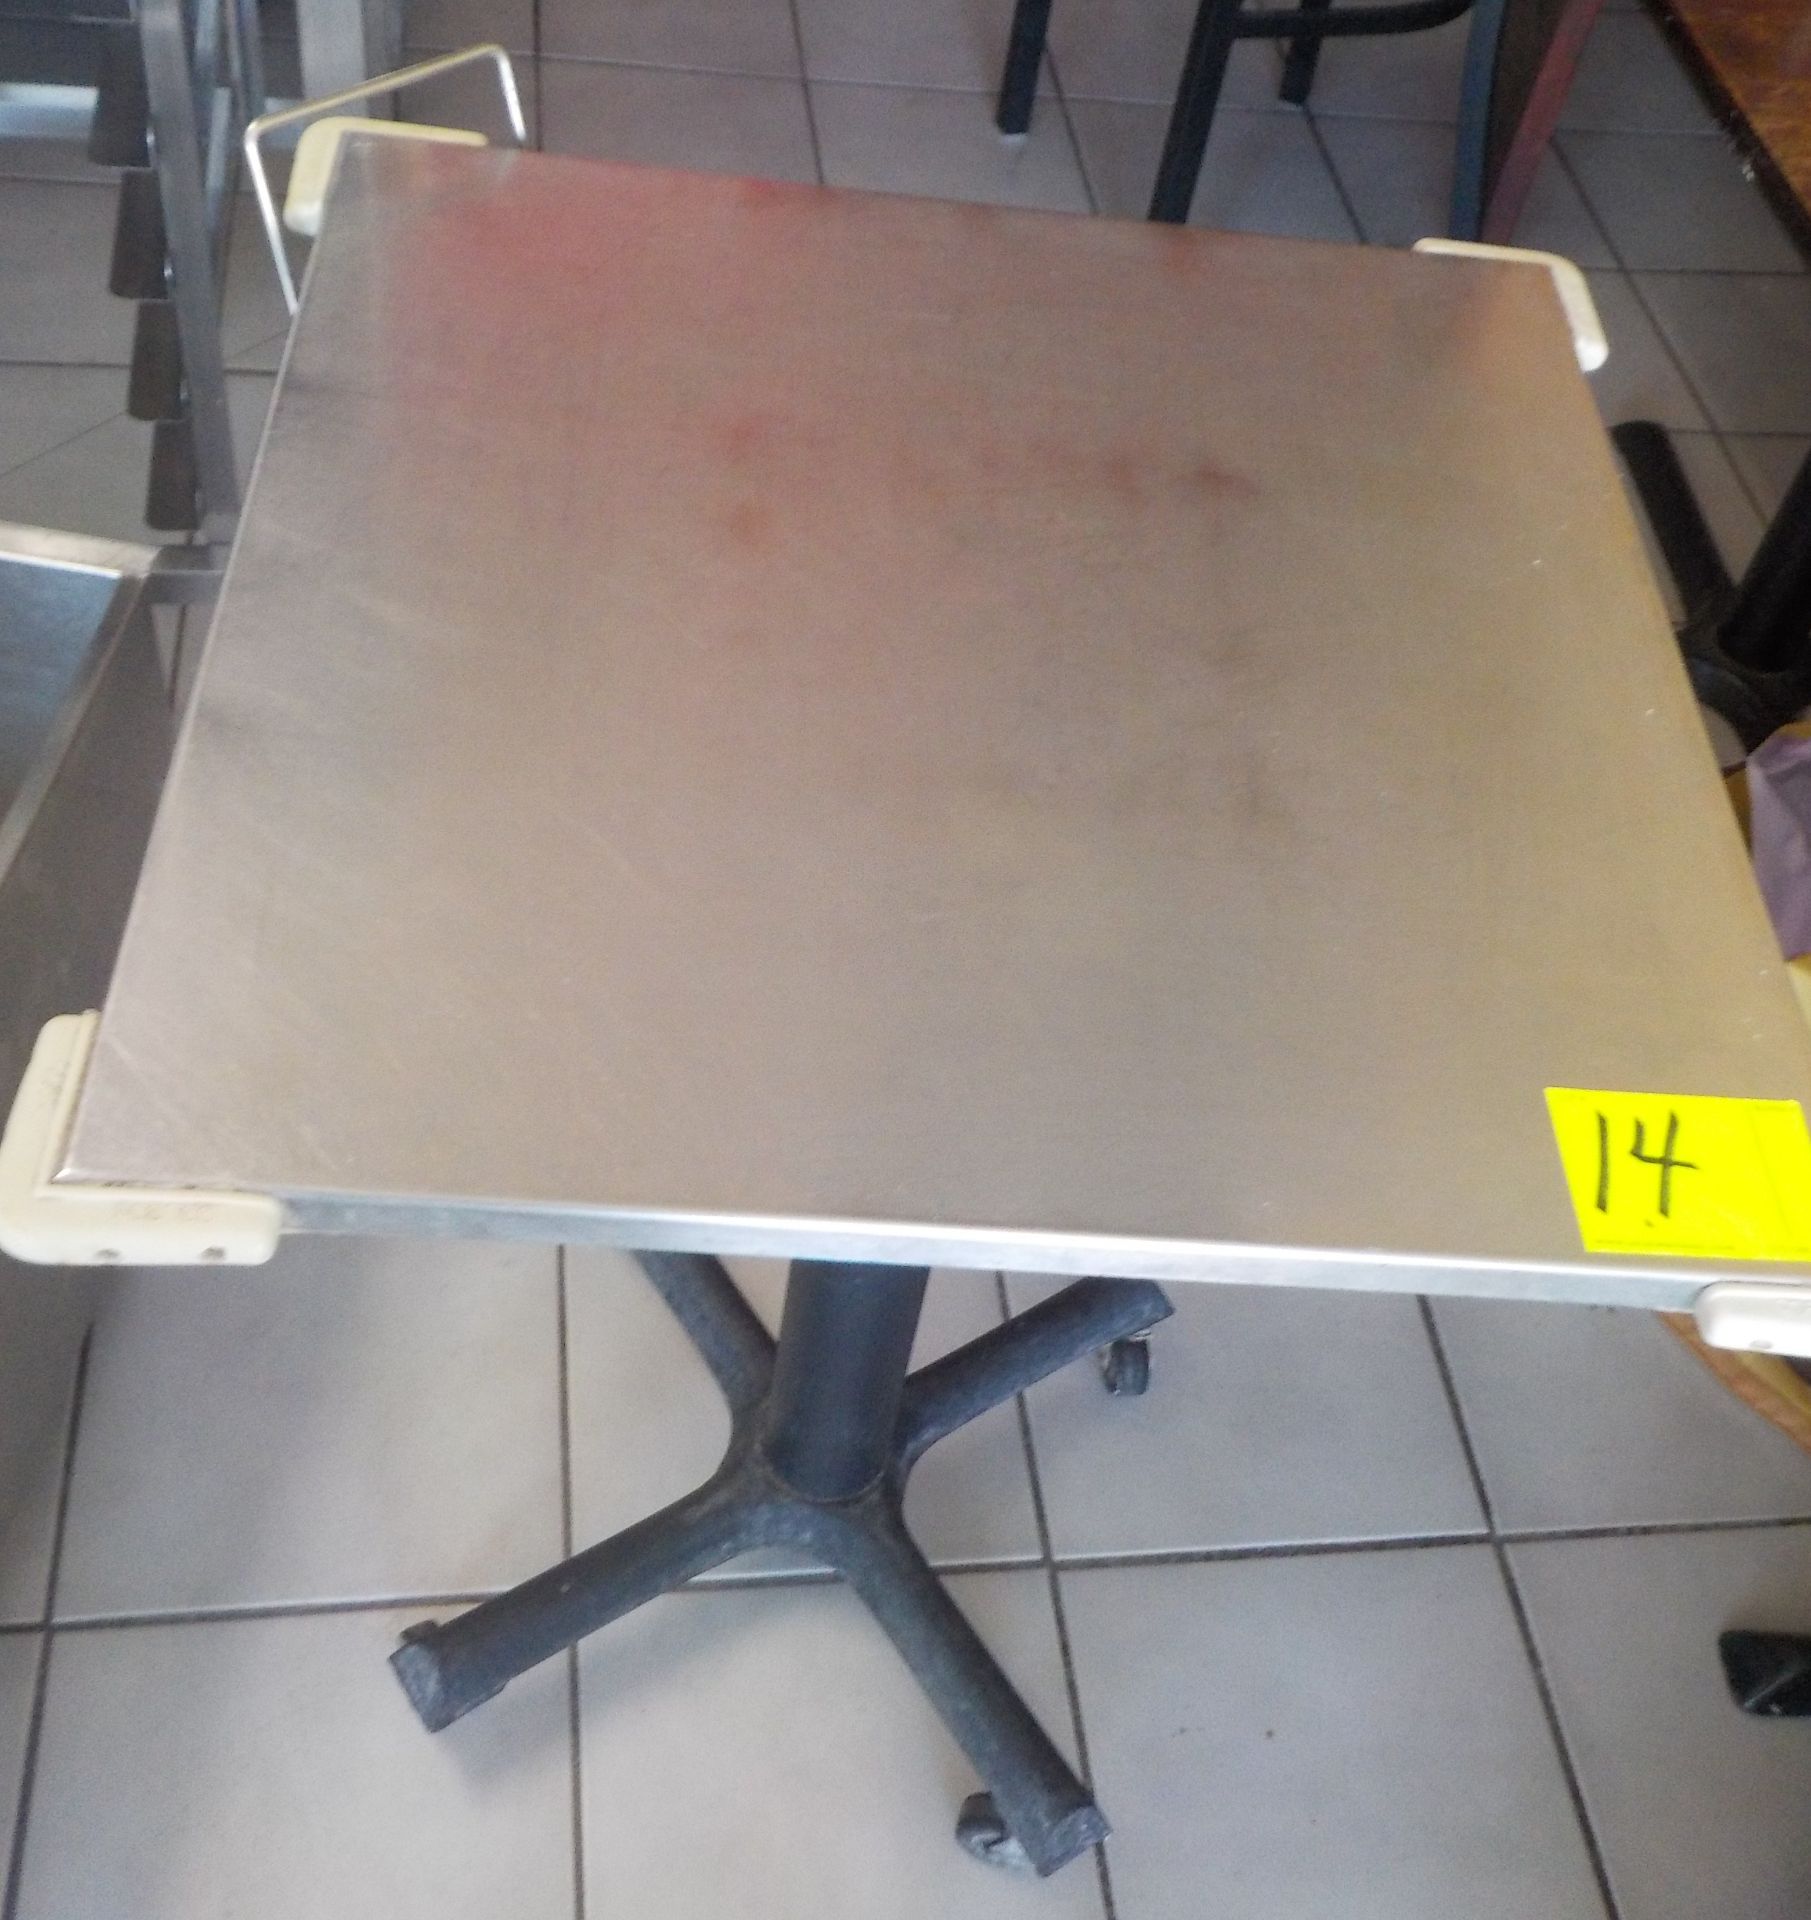 Stainless Steel Table 30” x 30”, Pedestal Base, Mobile